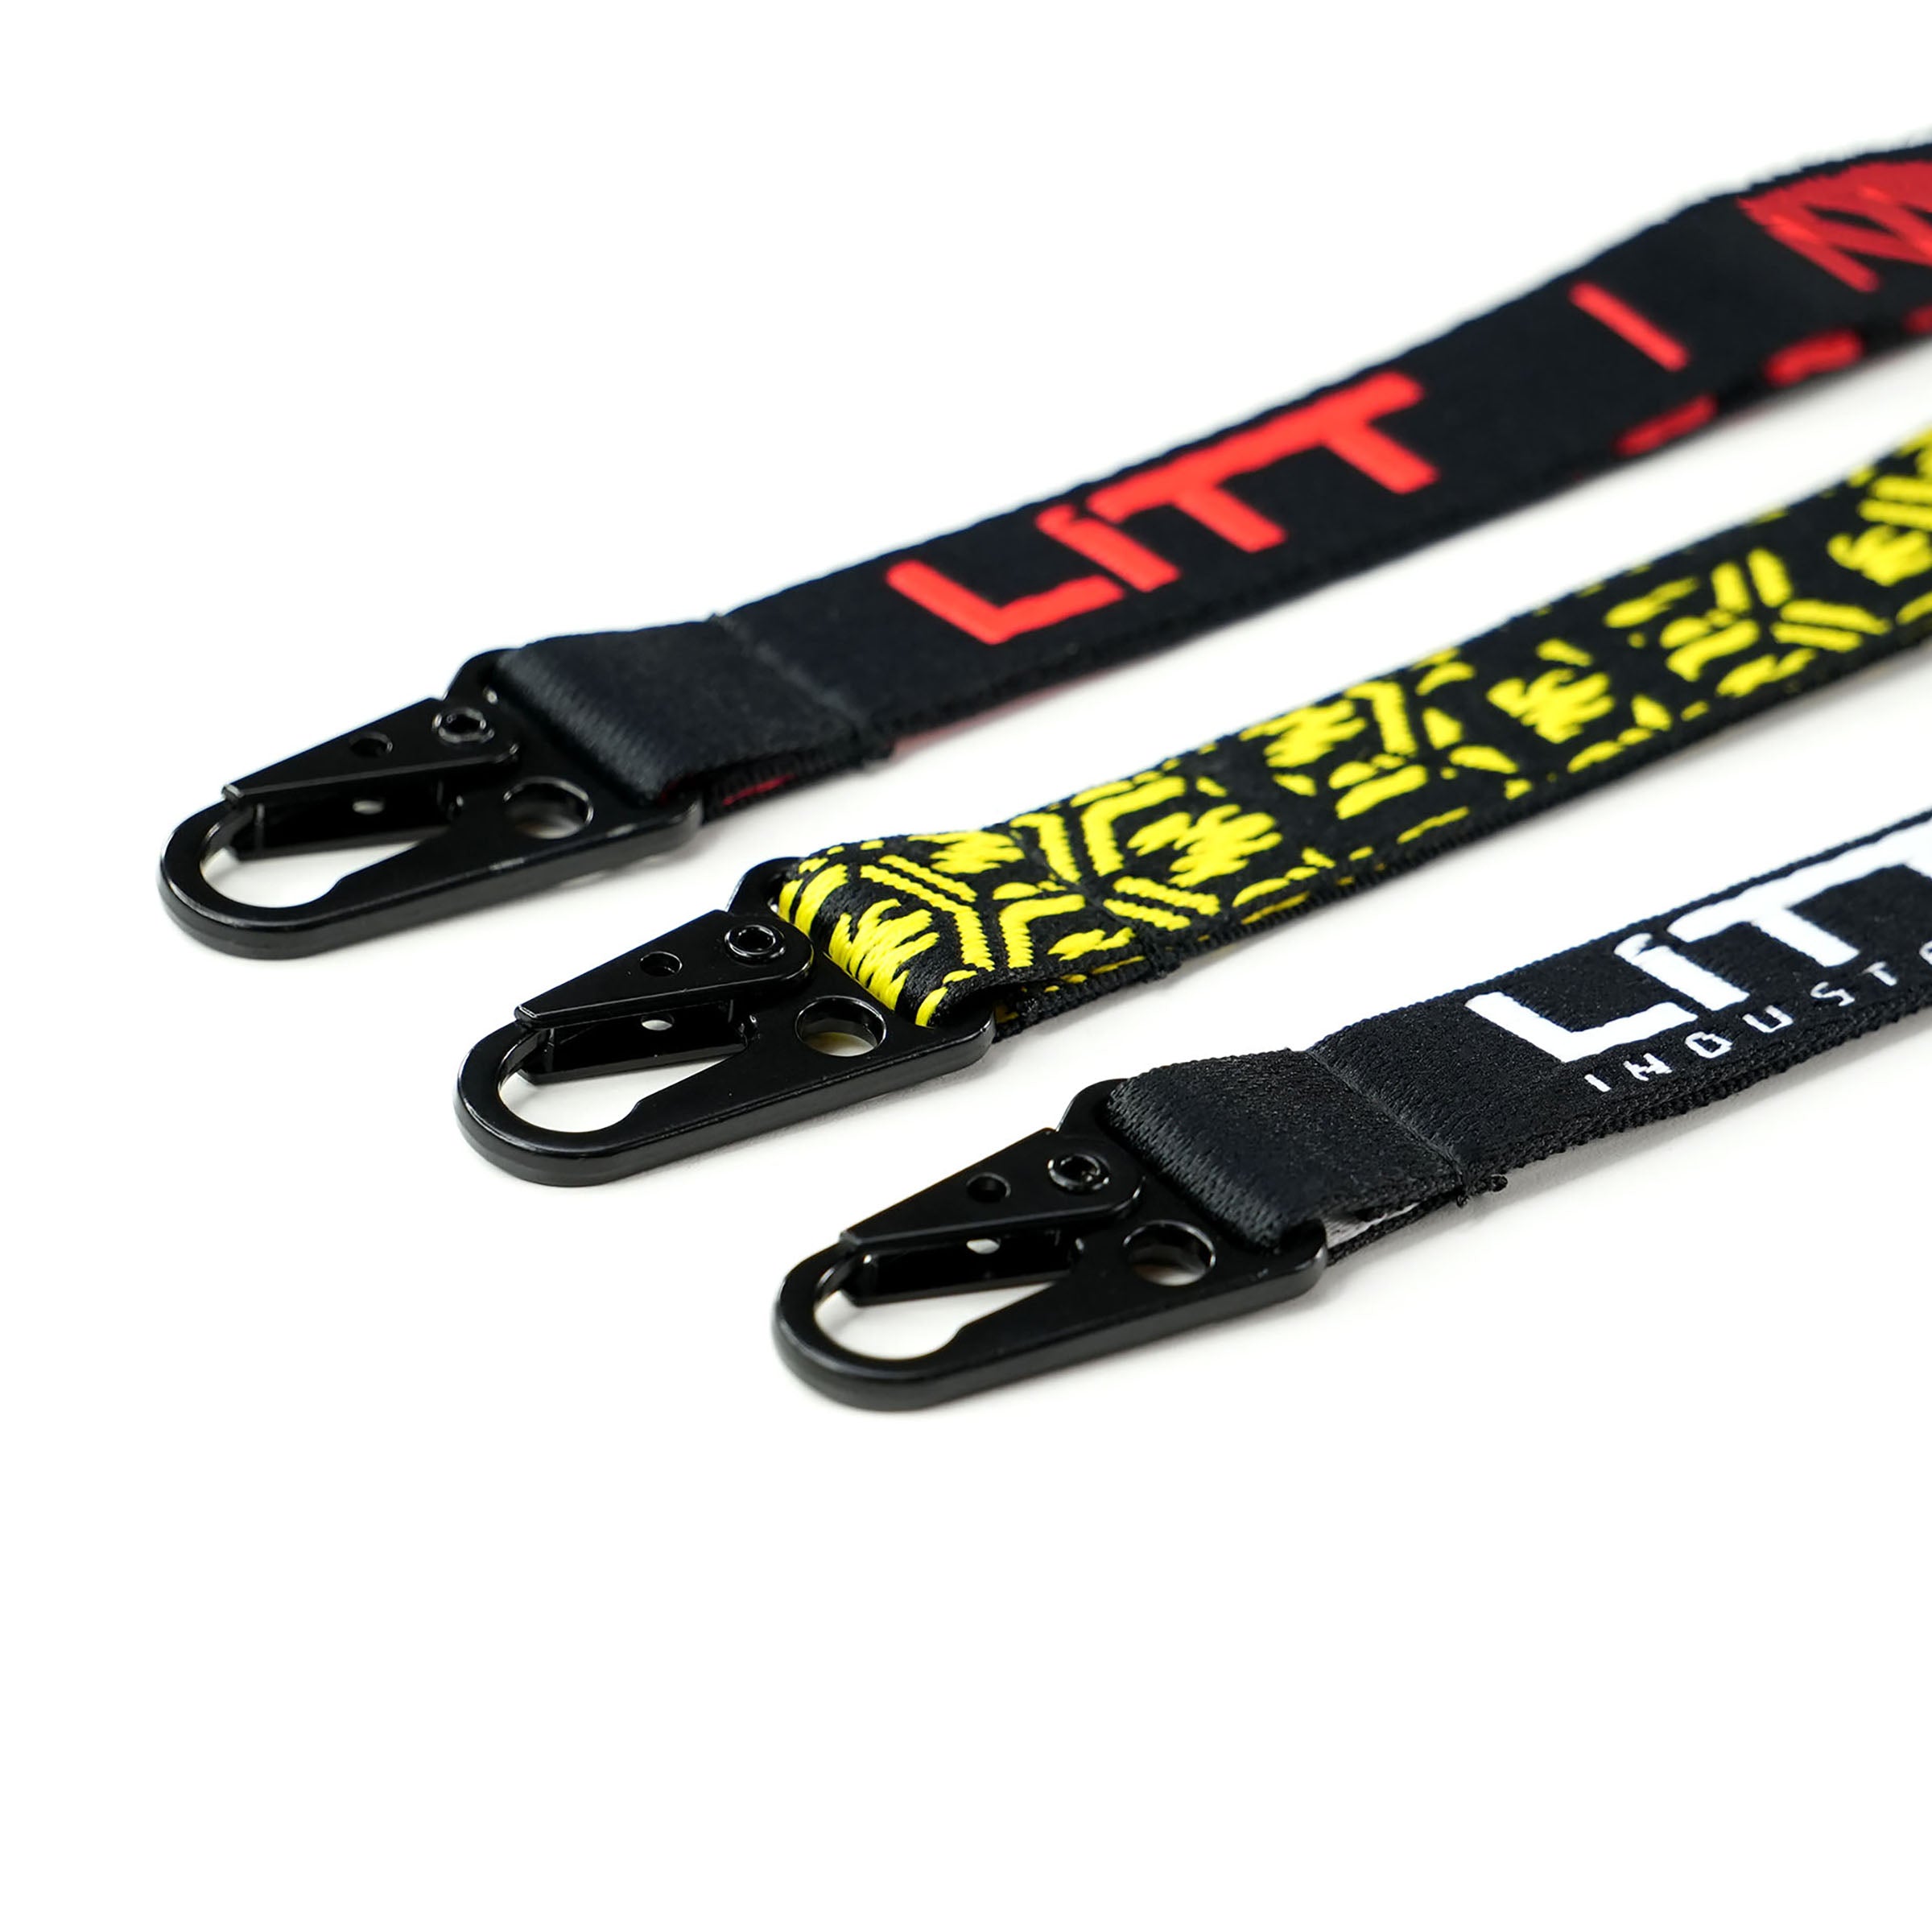 Litt Industries high quality heavy duty durable lanyards red yellow or white metal clip for extra security the best lanyards on the market